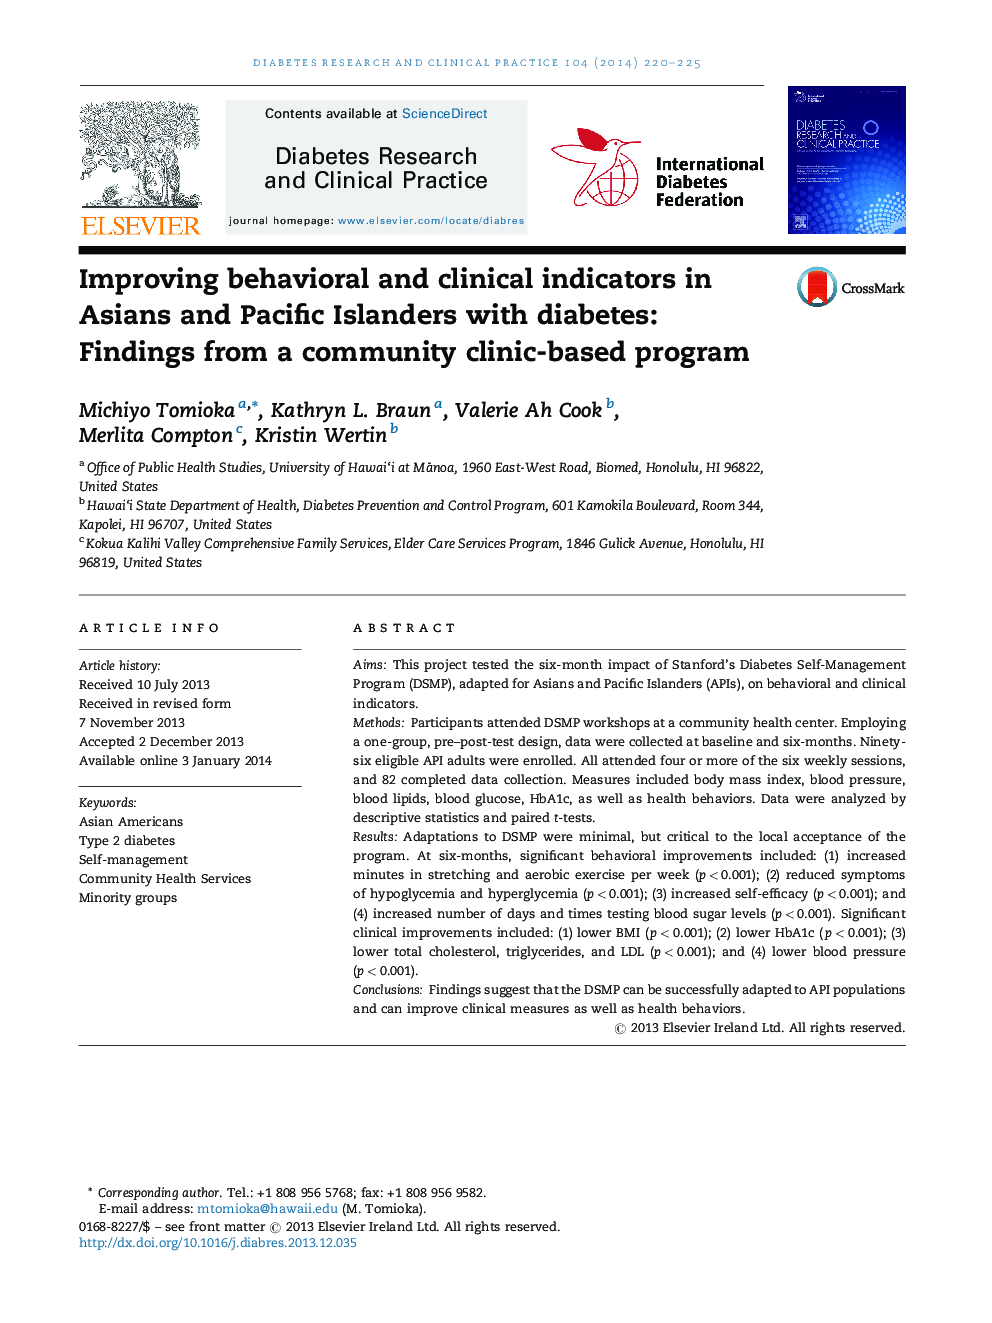 Improving behavioral and clinical indicators in Asians and Pacific Islanders with diabetes: Findings from a community clinic-based program